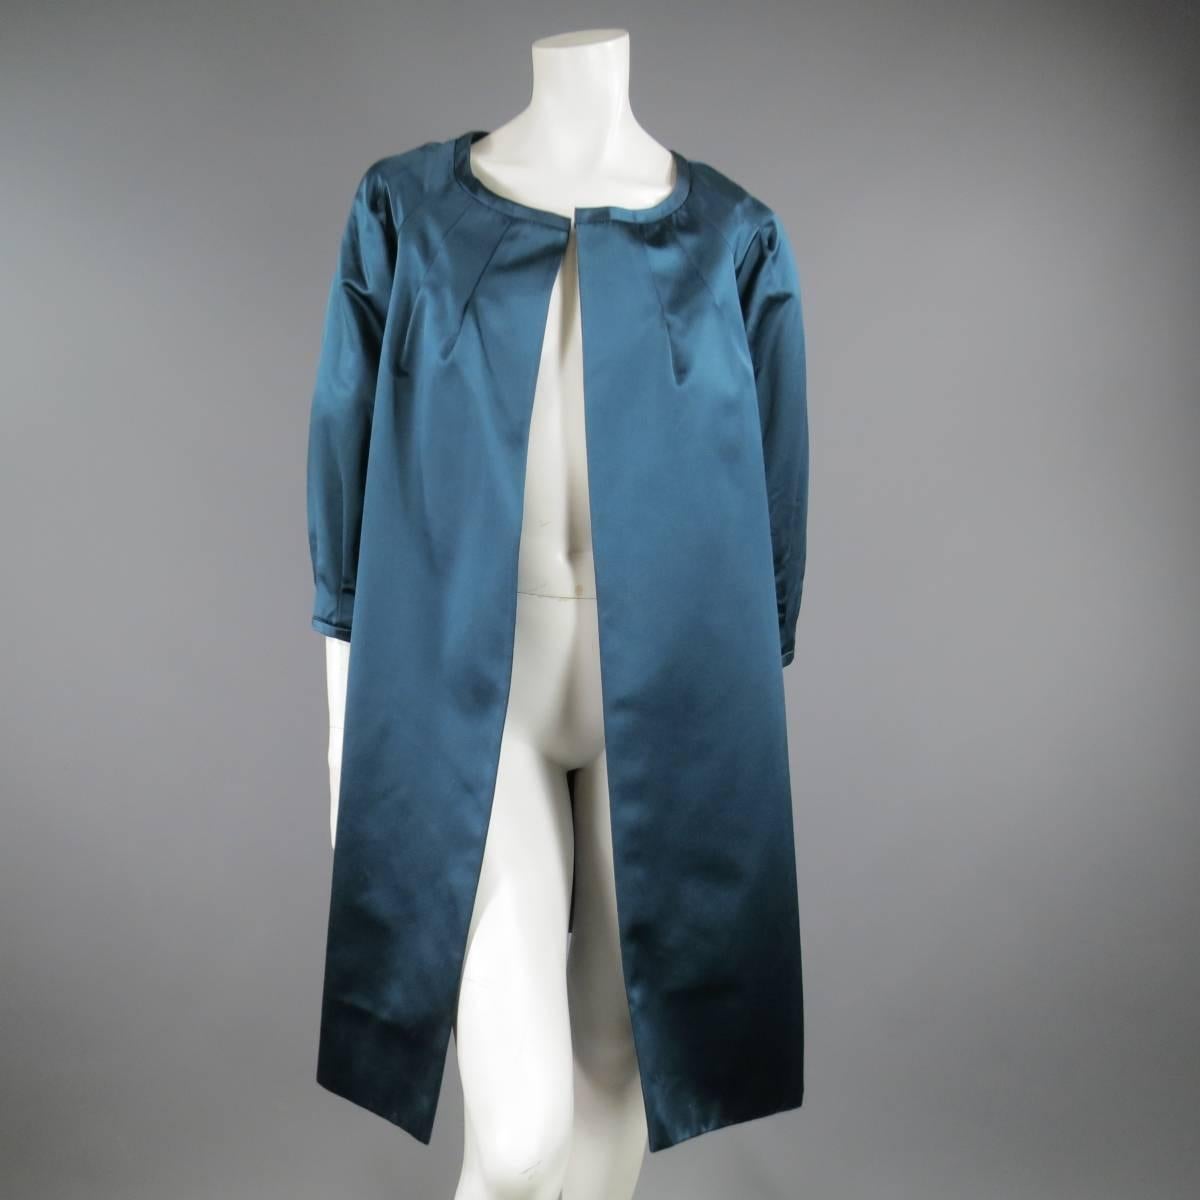 This gorgeous BARBARA TFANK evening coat comes in a teal silk satin and features a round neck, open front, three quarter pleated puff sleeves and A line silhouette.Made in USA.
 
Very Good Pre-Owned Condition.
Marked: 6
 
Measurements:
